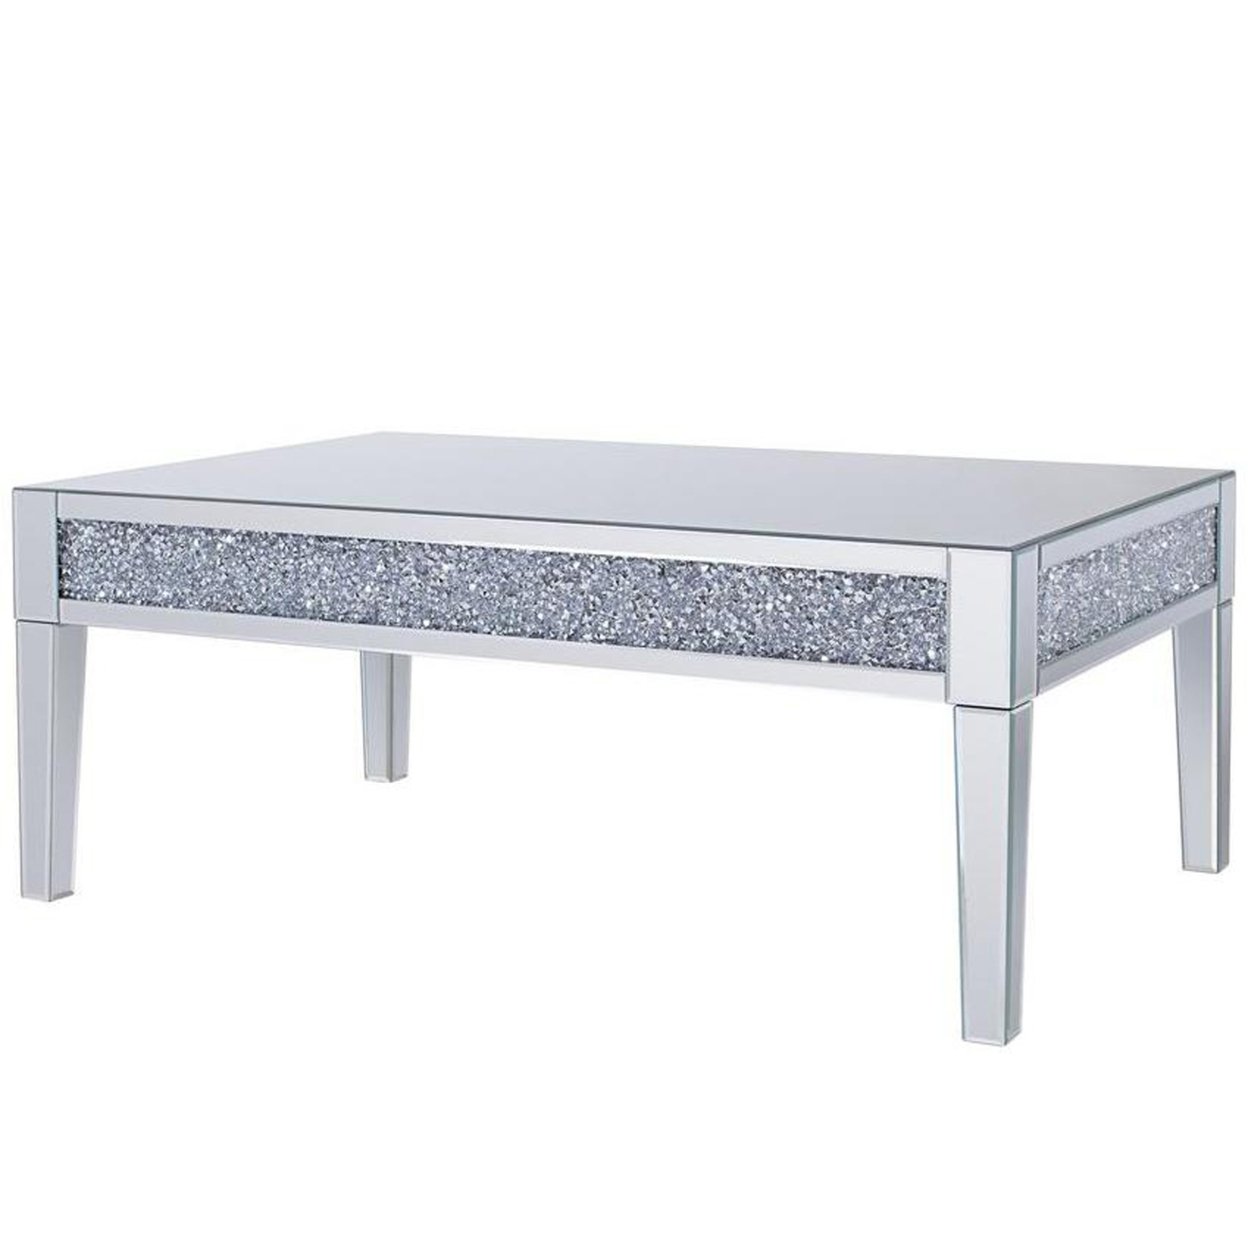 Wooden and Mirror Rectangular Coffee Table with Faux Crystals Inlay ...